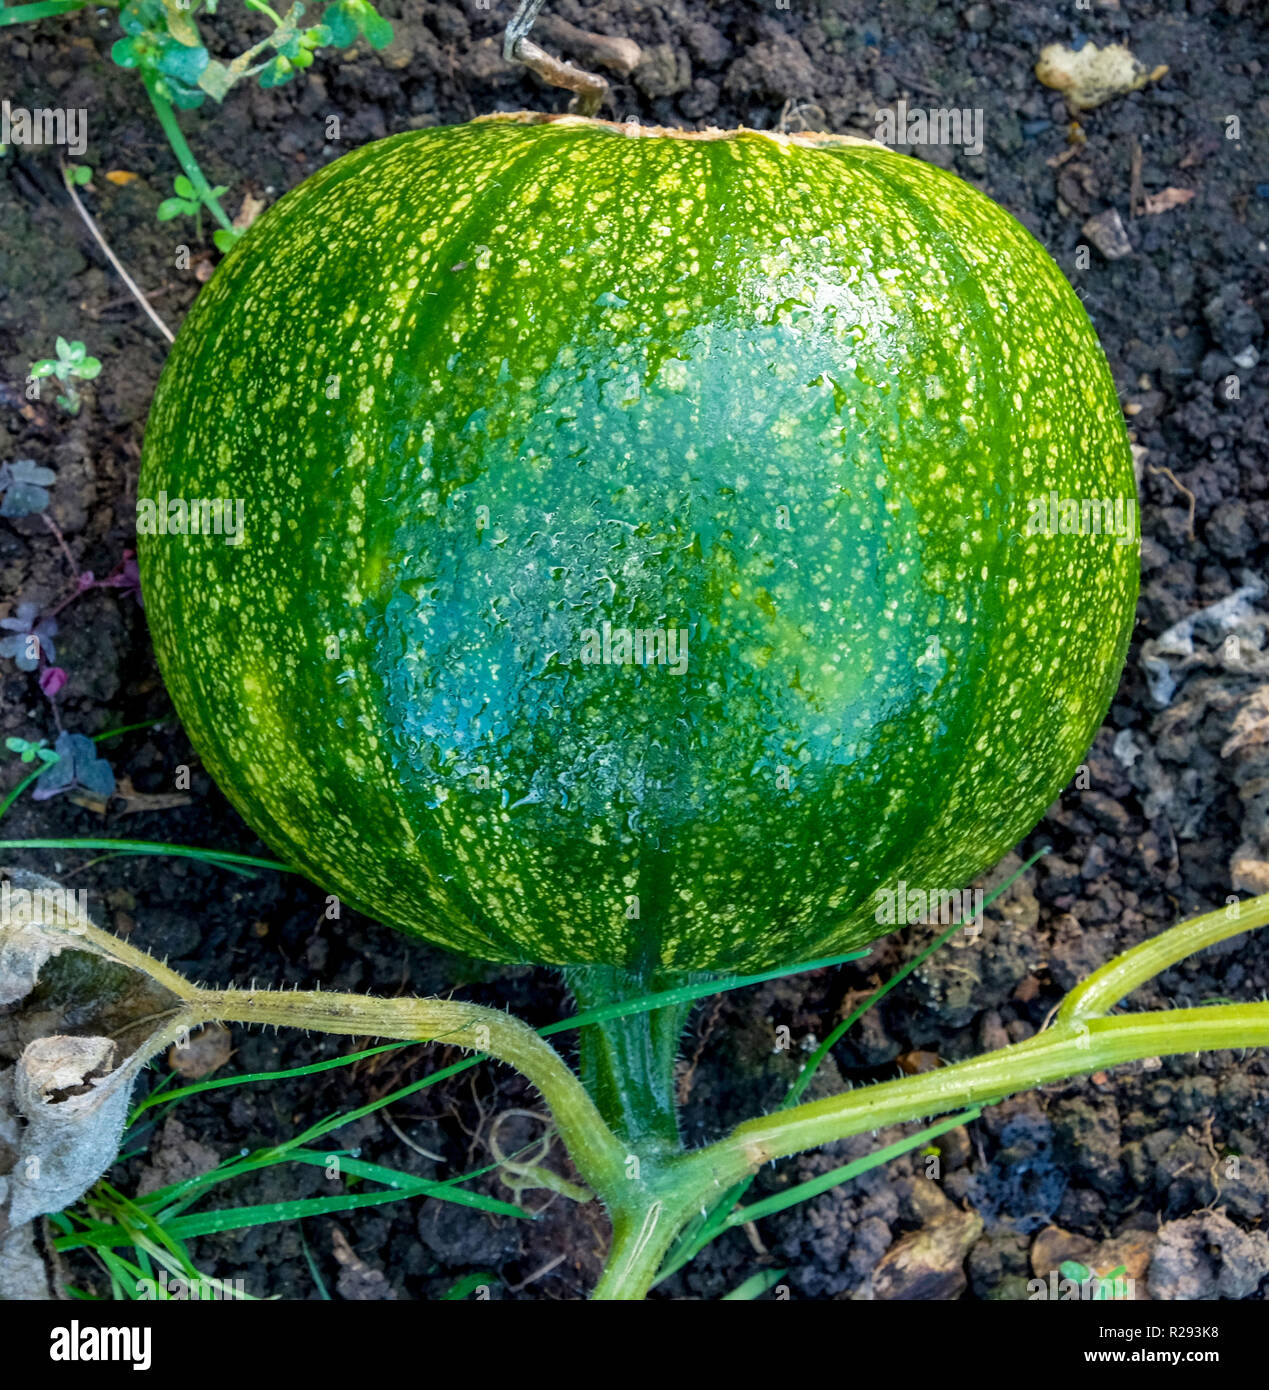 A green round pumpkin growing on brown soil in a vegetable patch Stock Photo